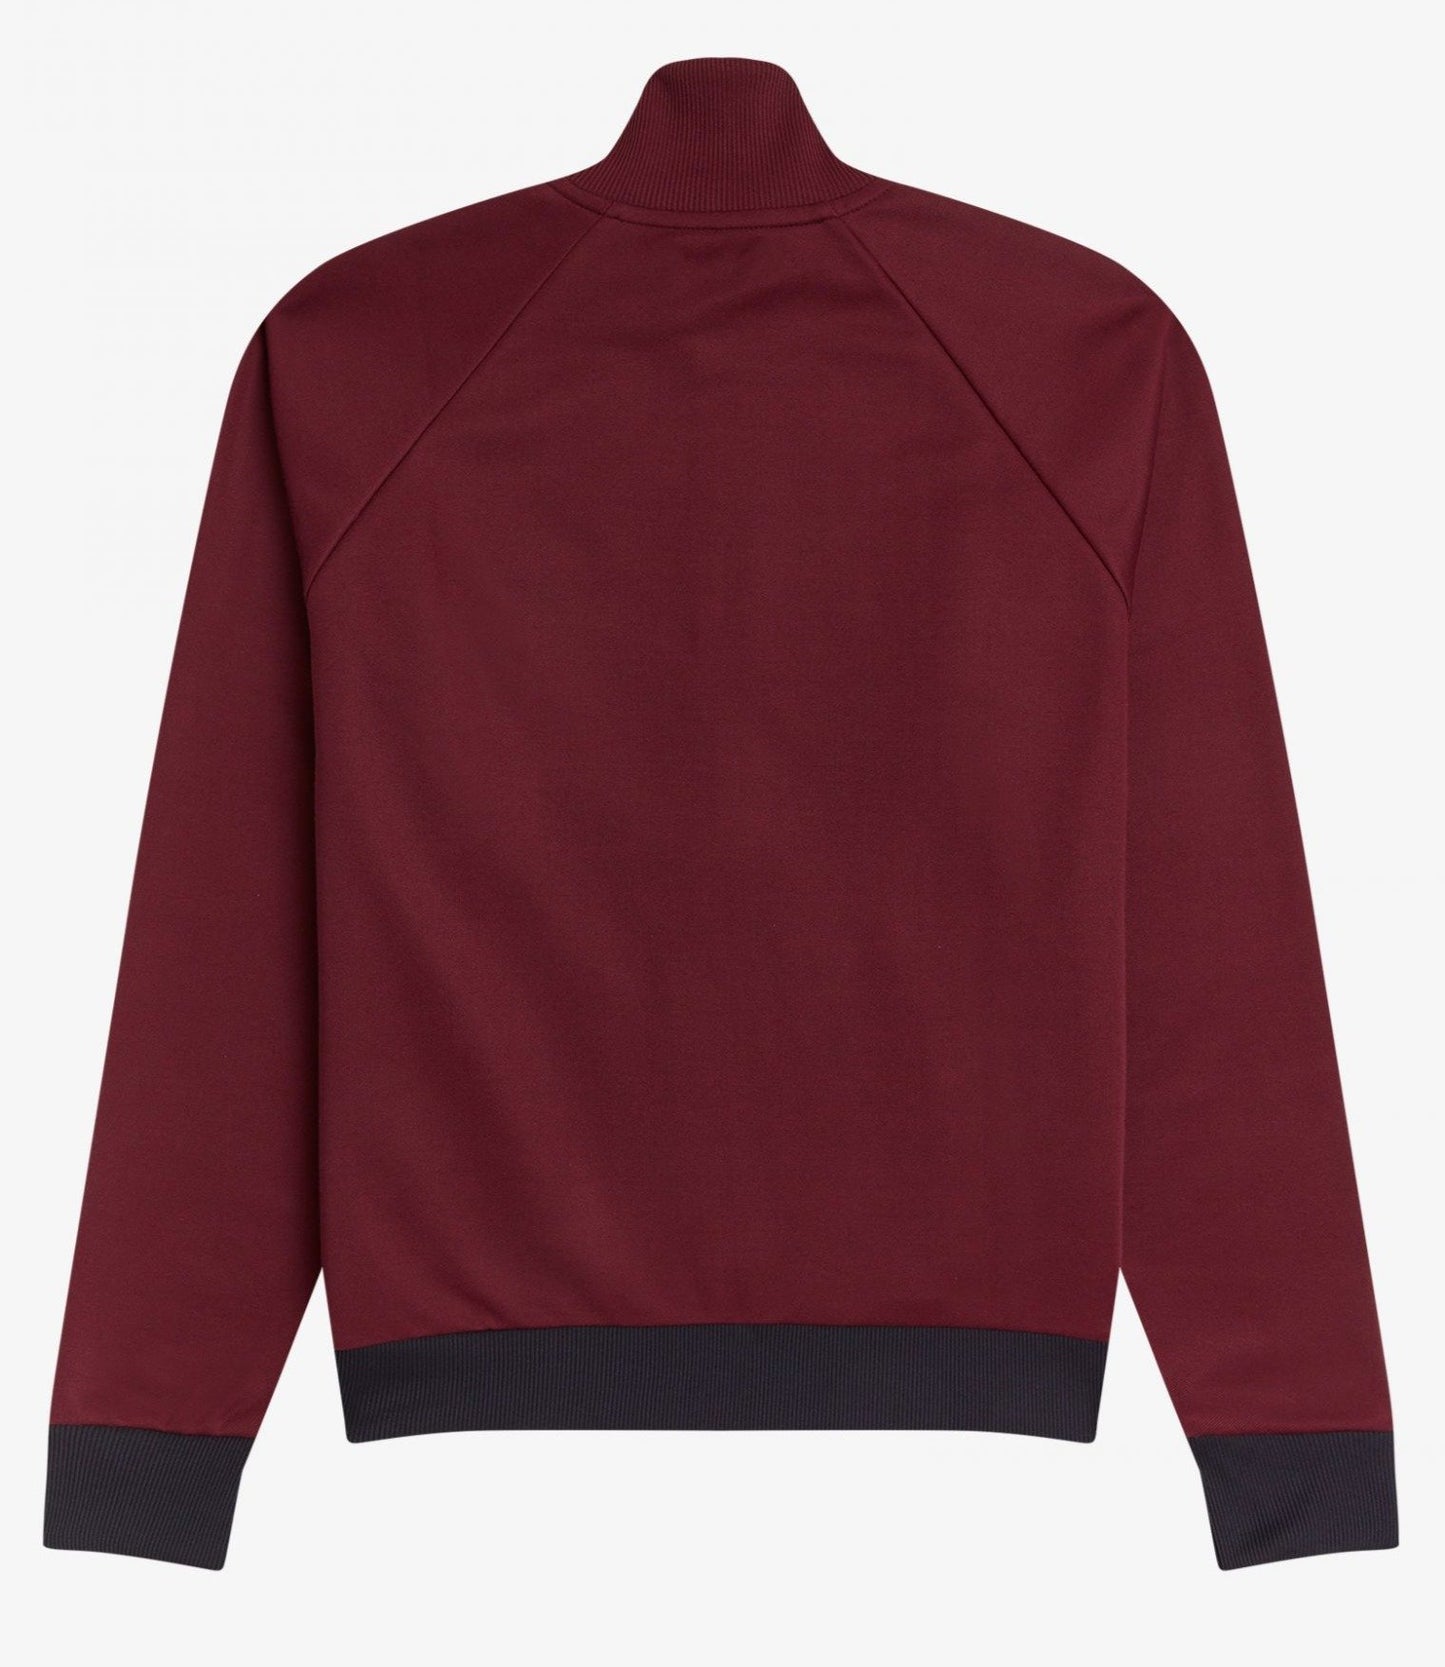 Fred Perry Contrast Trim Track Jacket